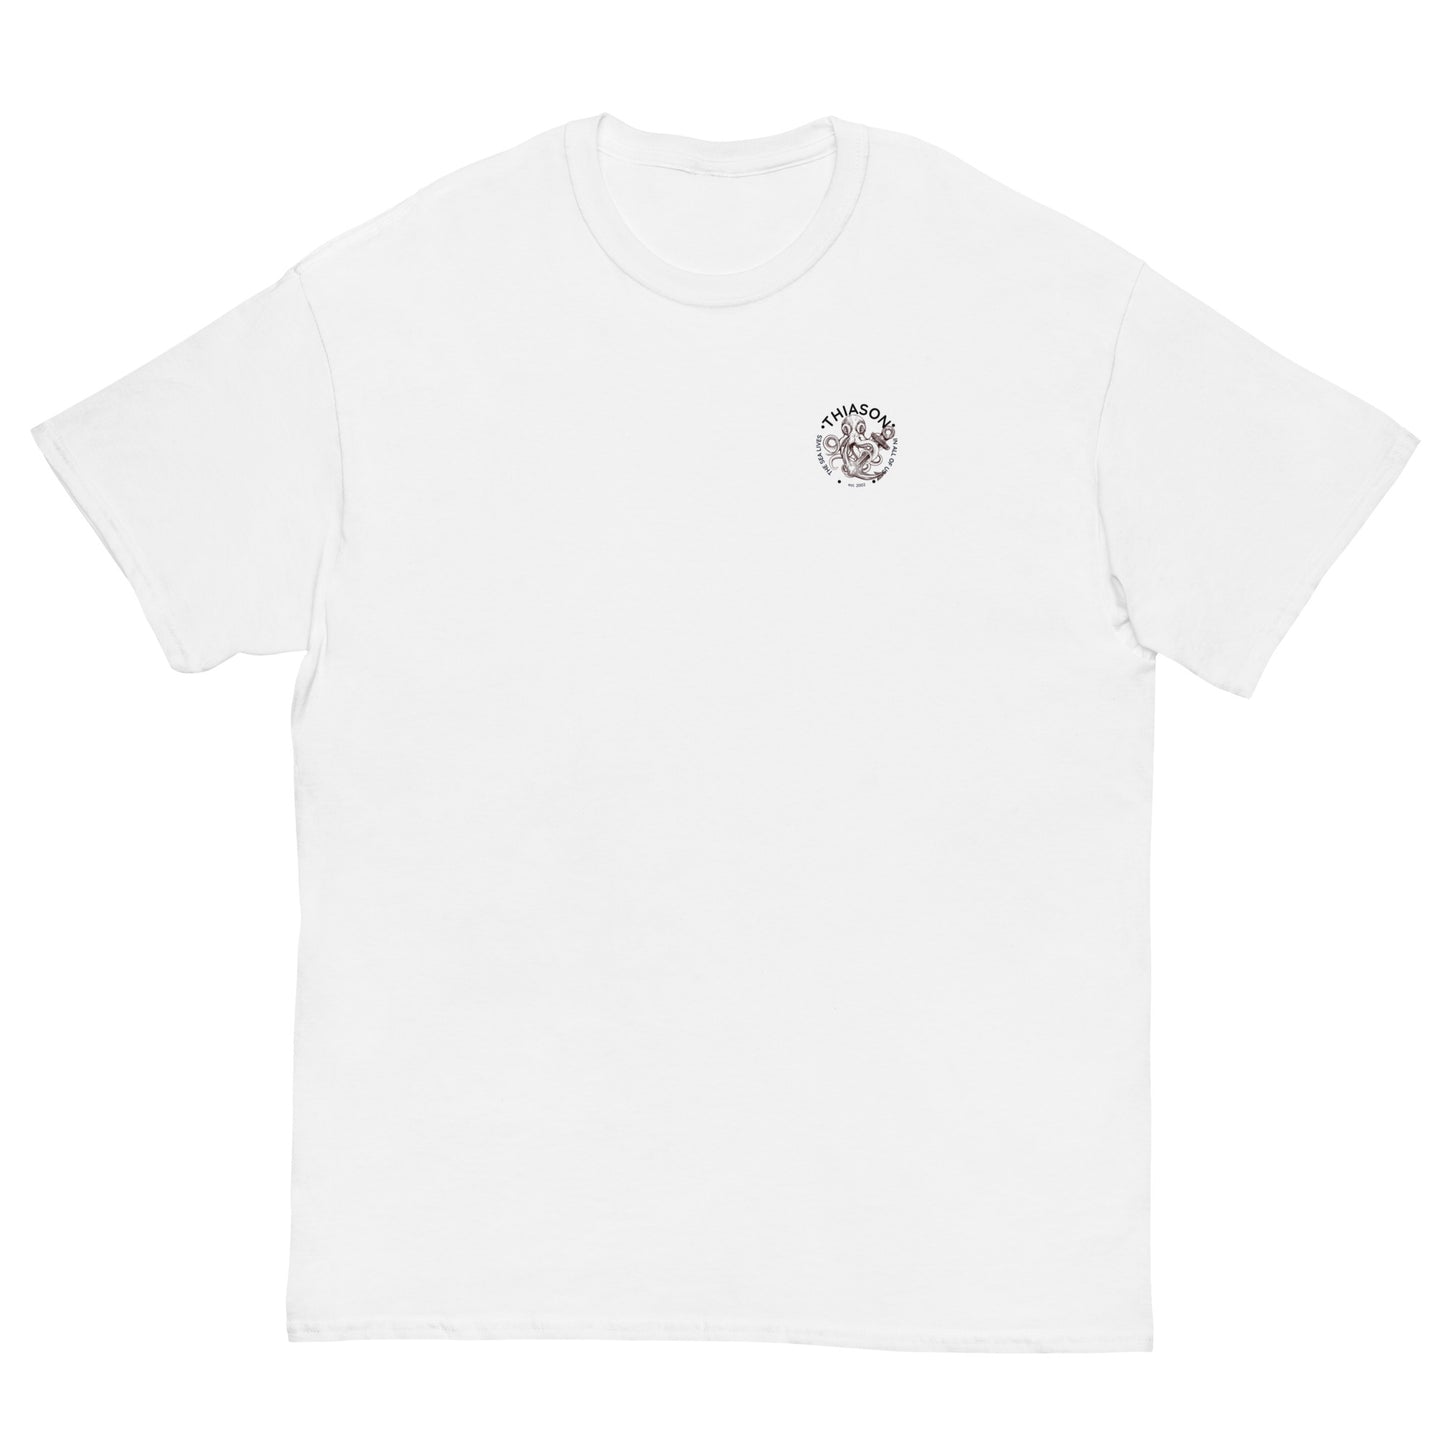 THE SEA IN ALL OF US Men's Classic Tee